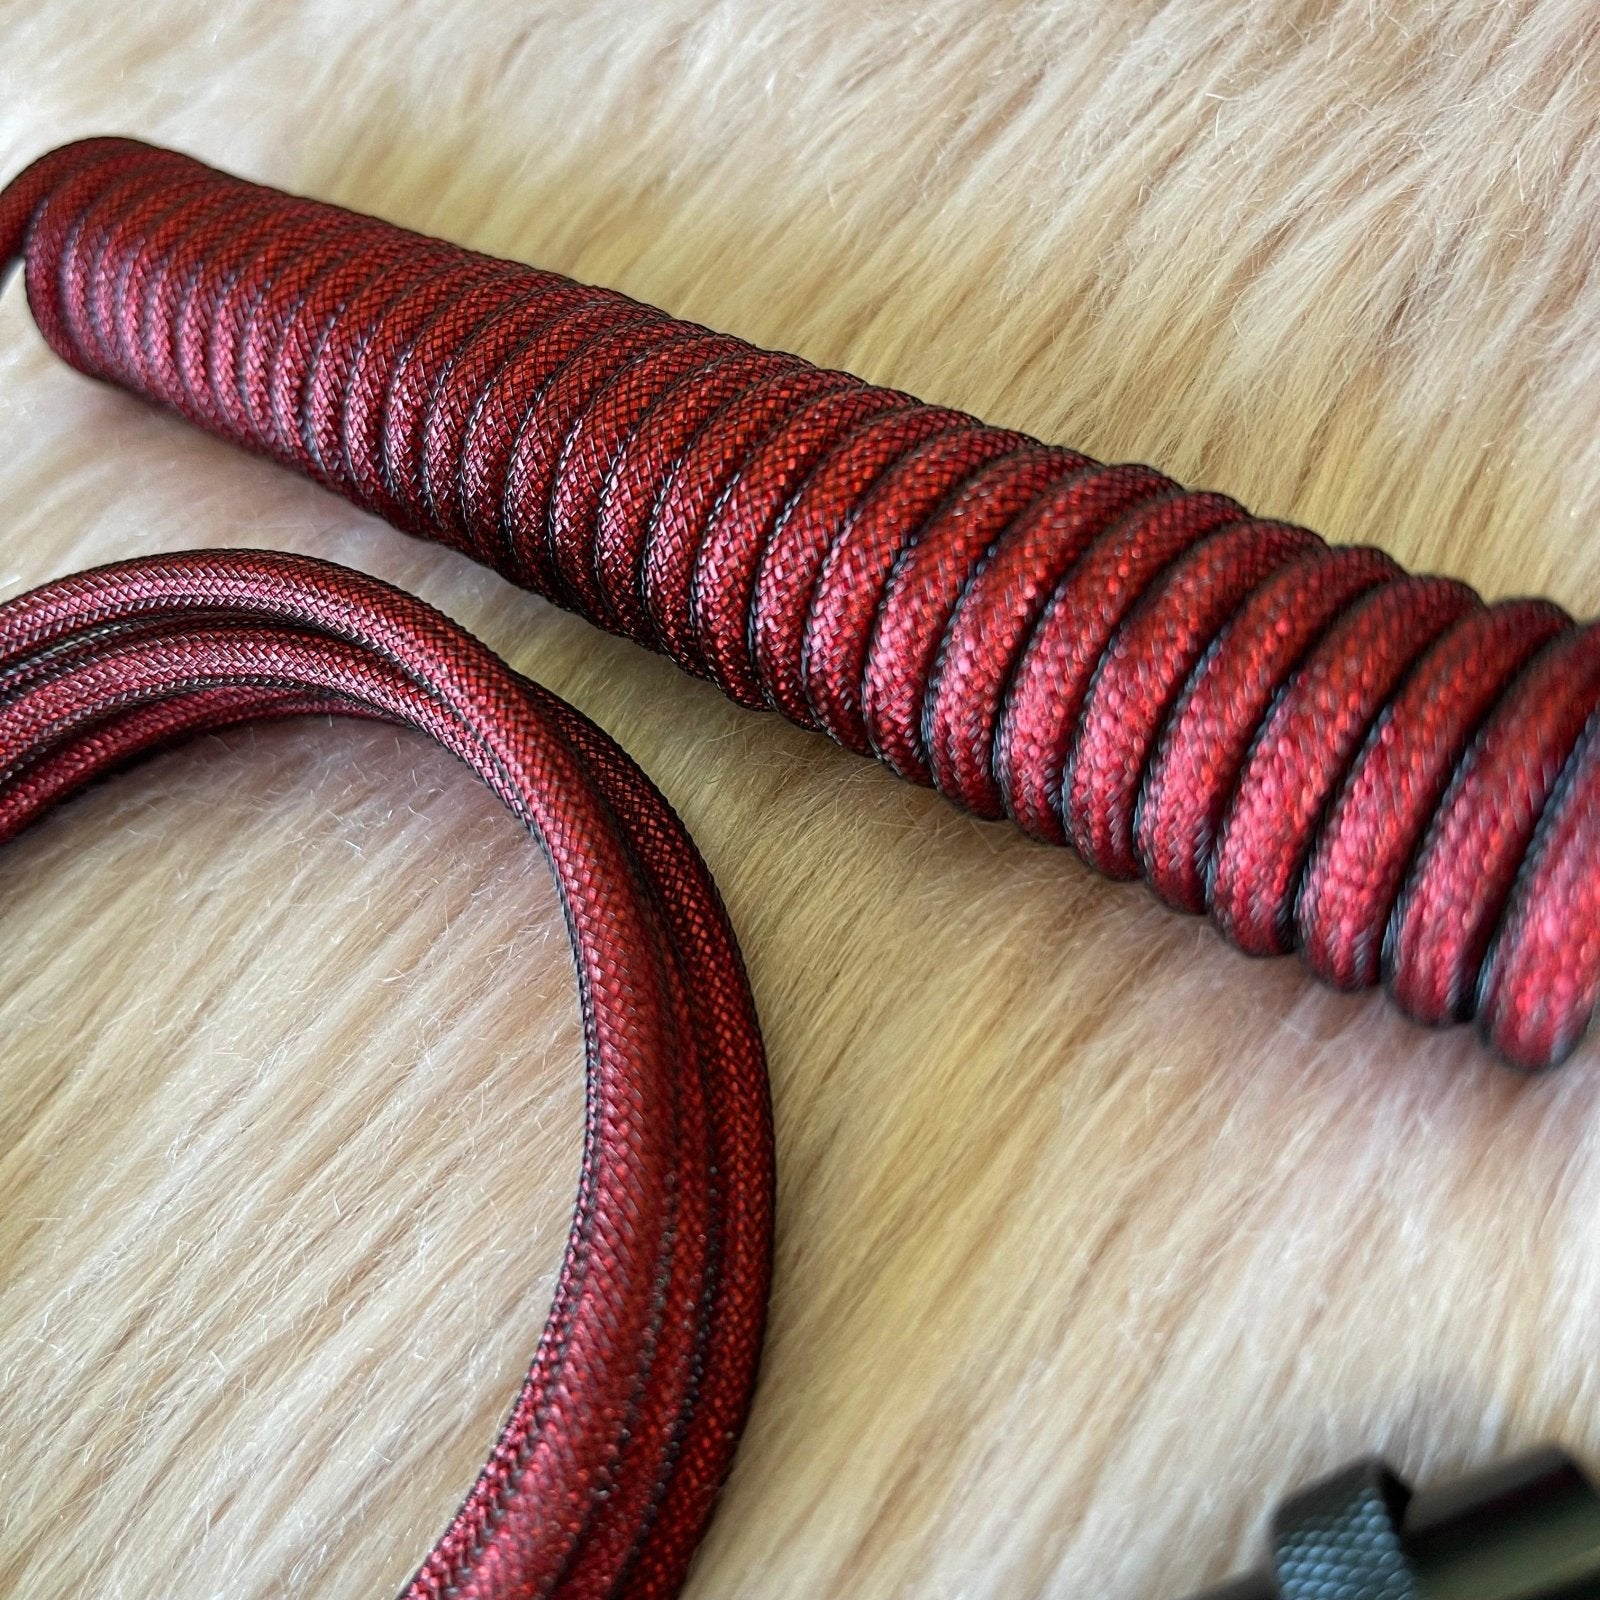 CUSTOM COILED CABLE GX16 -Red - CLS Tech | CLS Tech